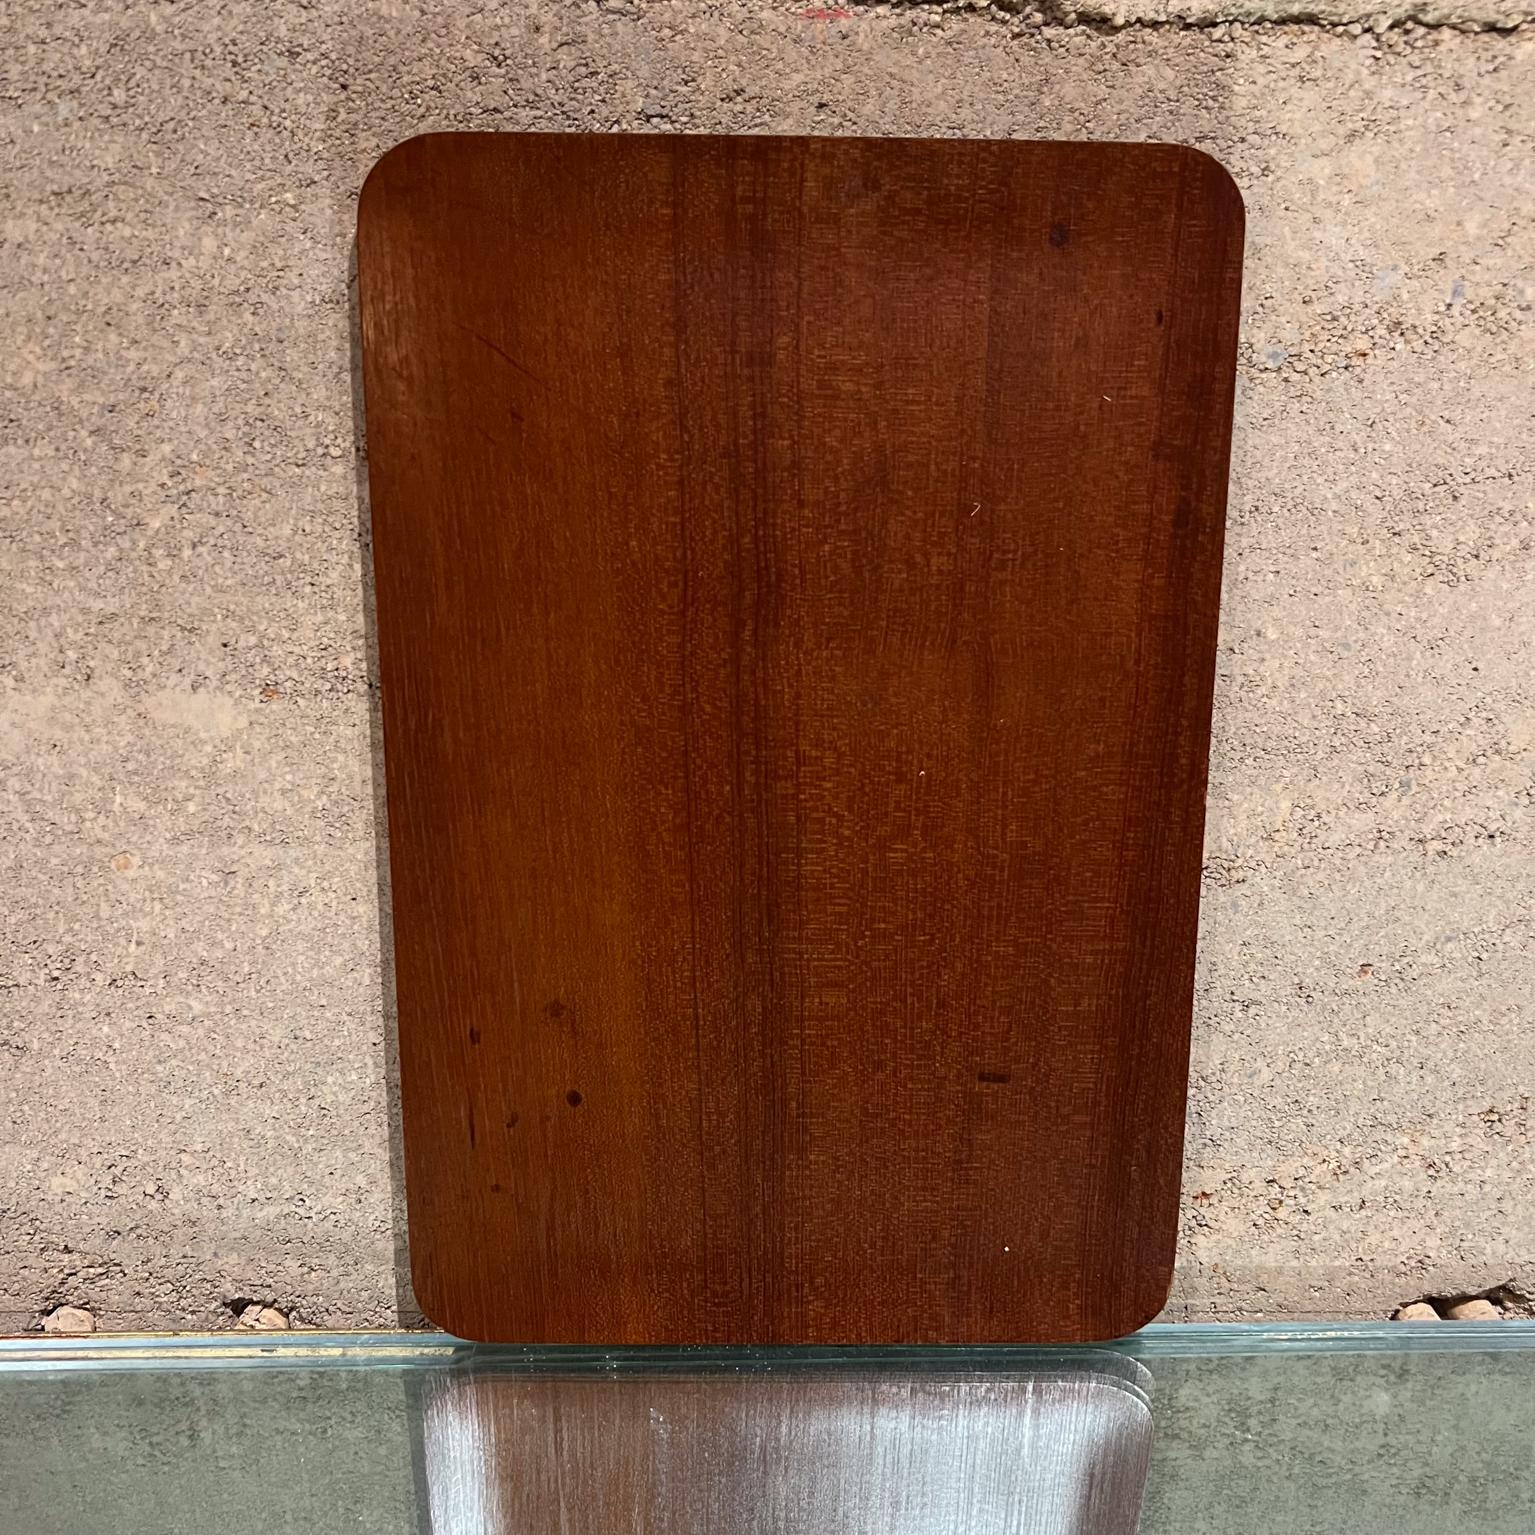 Bent Plywood Serving Barware Teak Tray
Rectangular Service Tray Platter
12.25 w x 18 x .5
Preowned vintage unrestored condition, please see images provided.